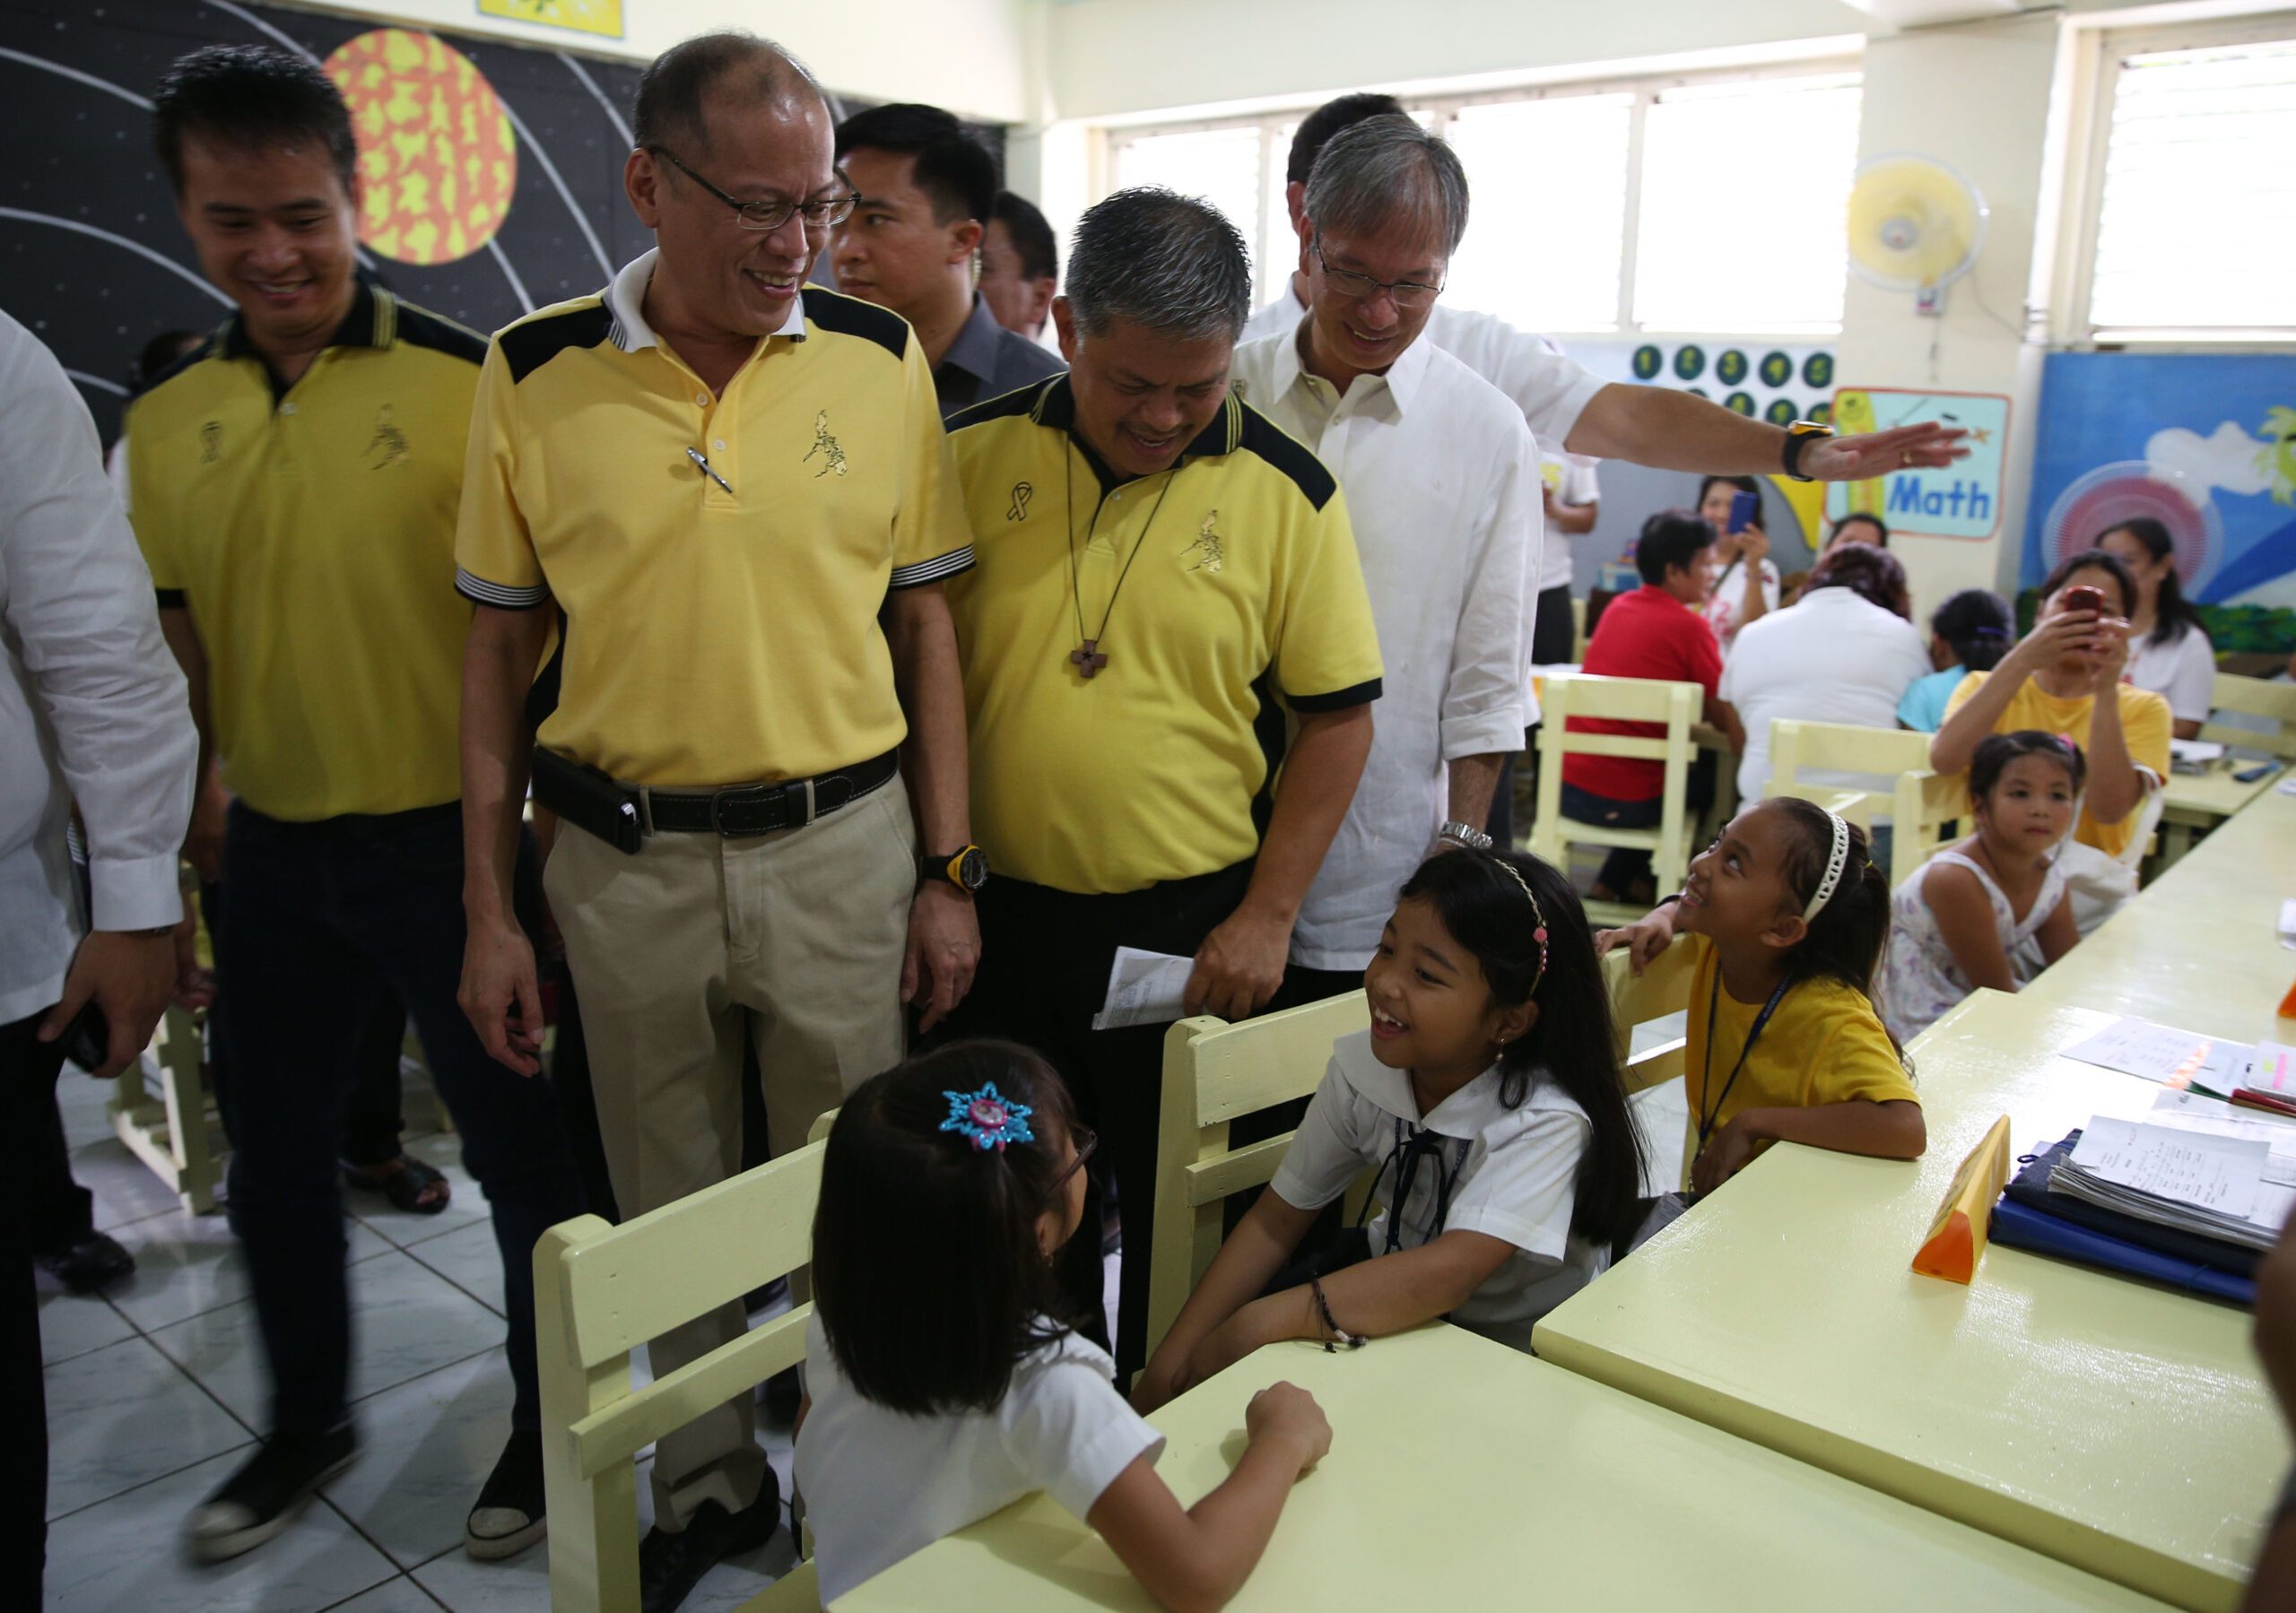 Luistro on DepEd stint: ‘Most meaningful job of my life’